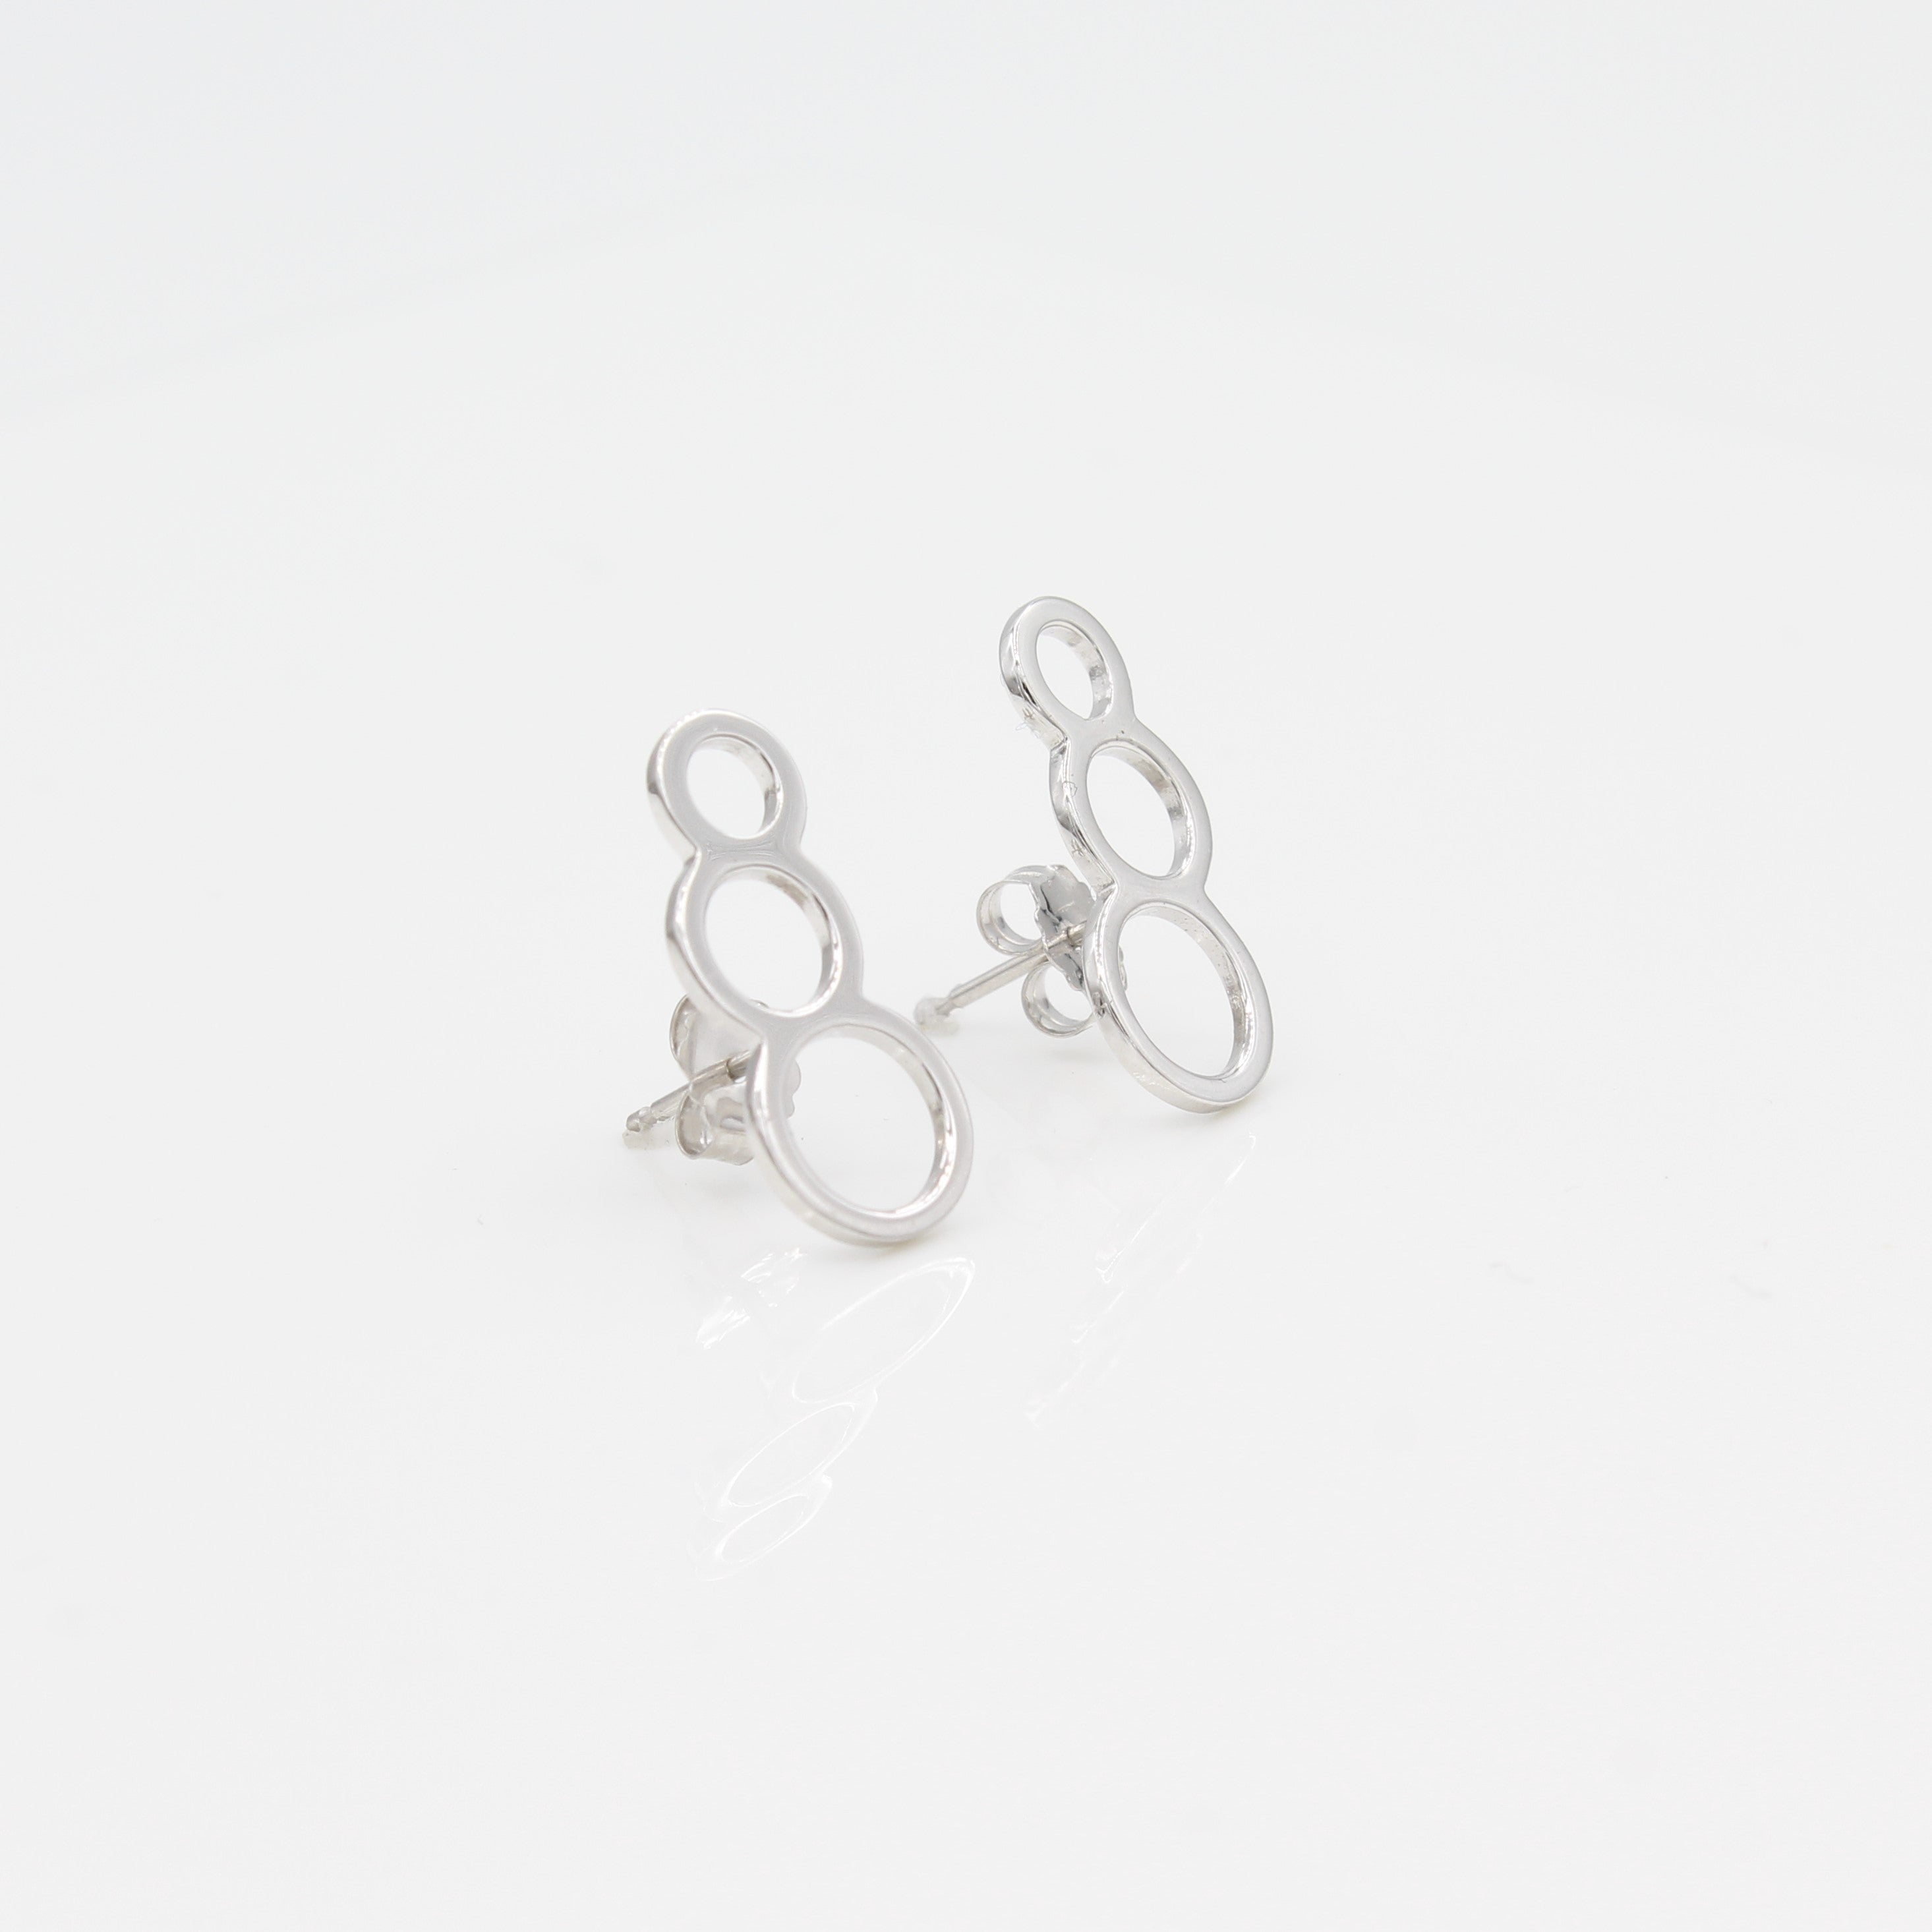 14k White Gold Bubble Ear Climbers Earrings with Posts, Alternate View